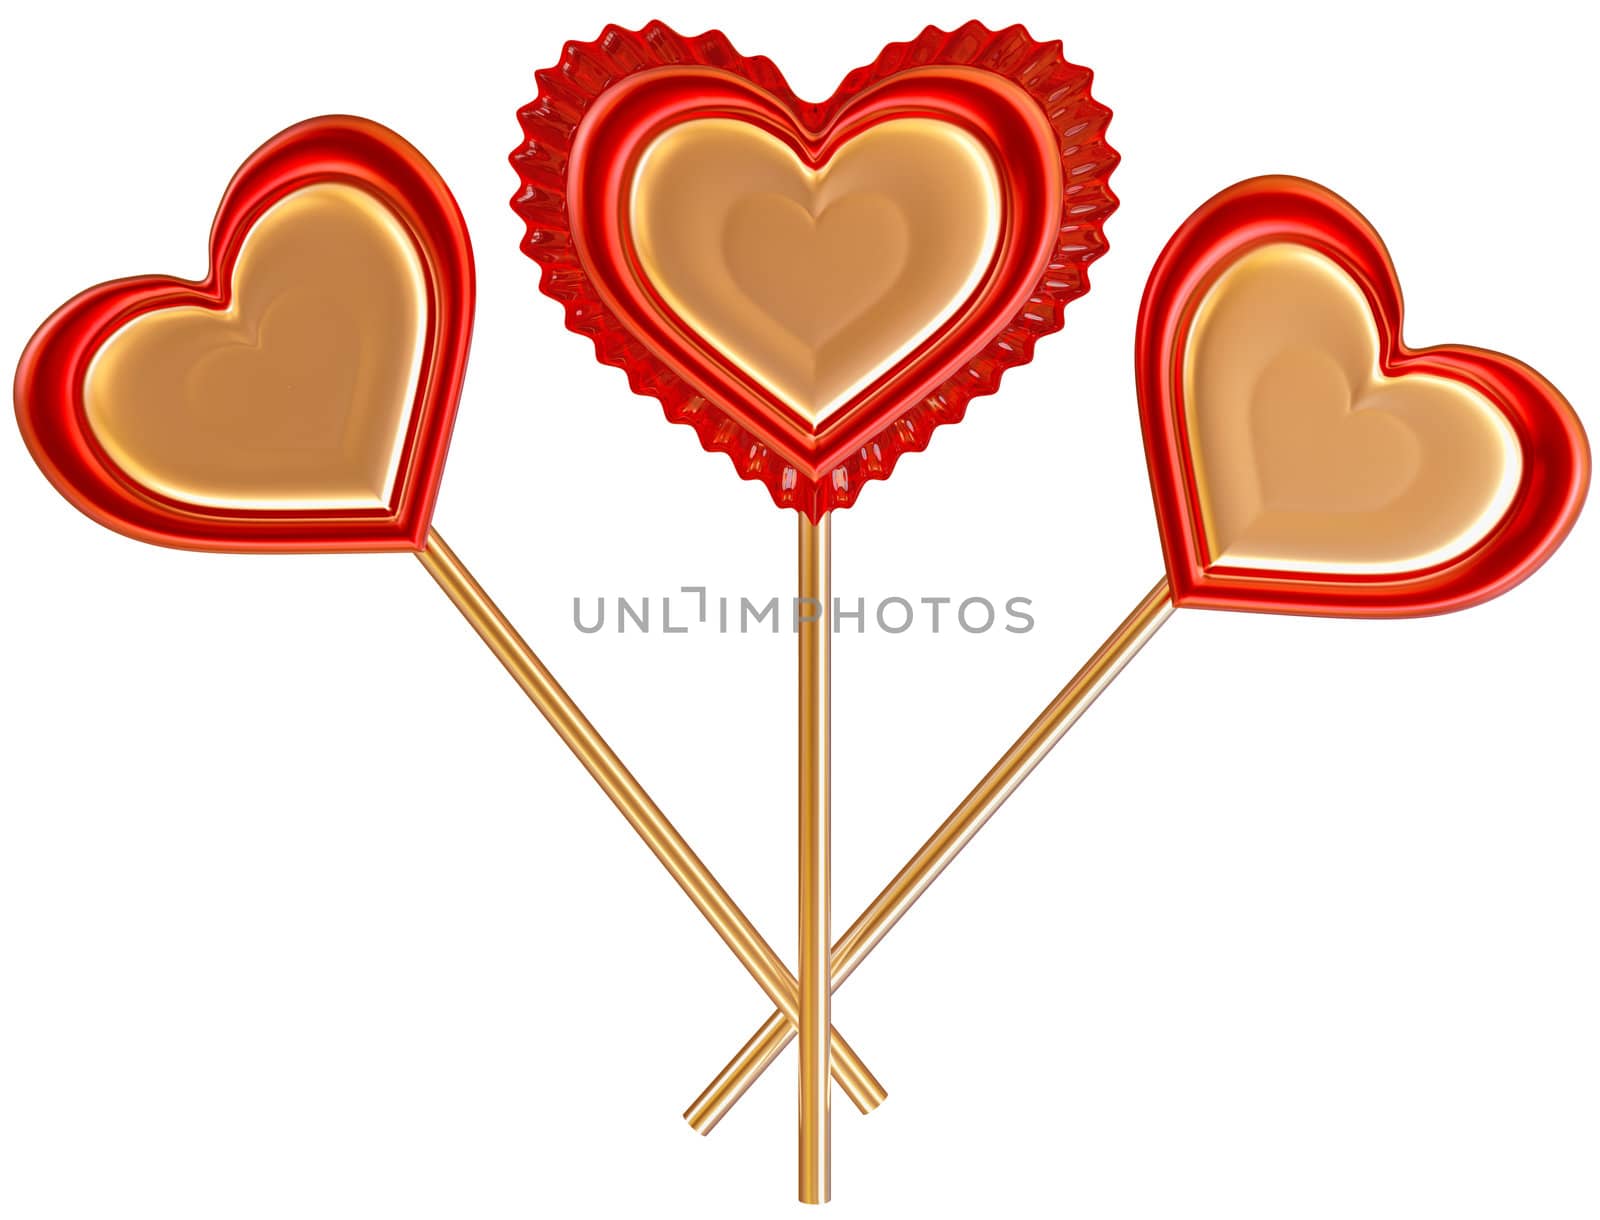 three golden and red lollipops on white background